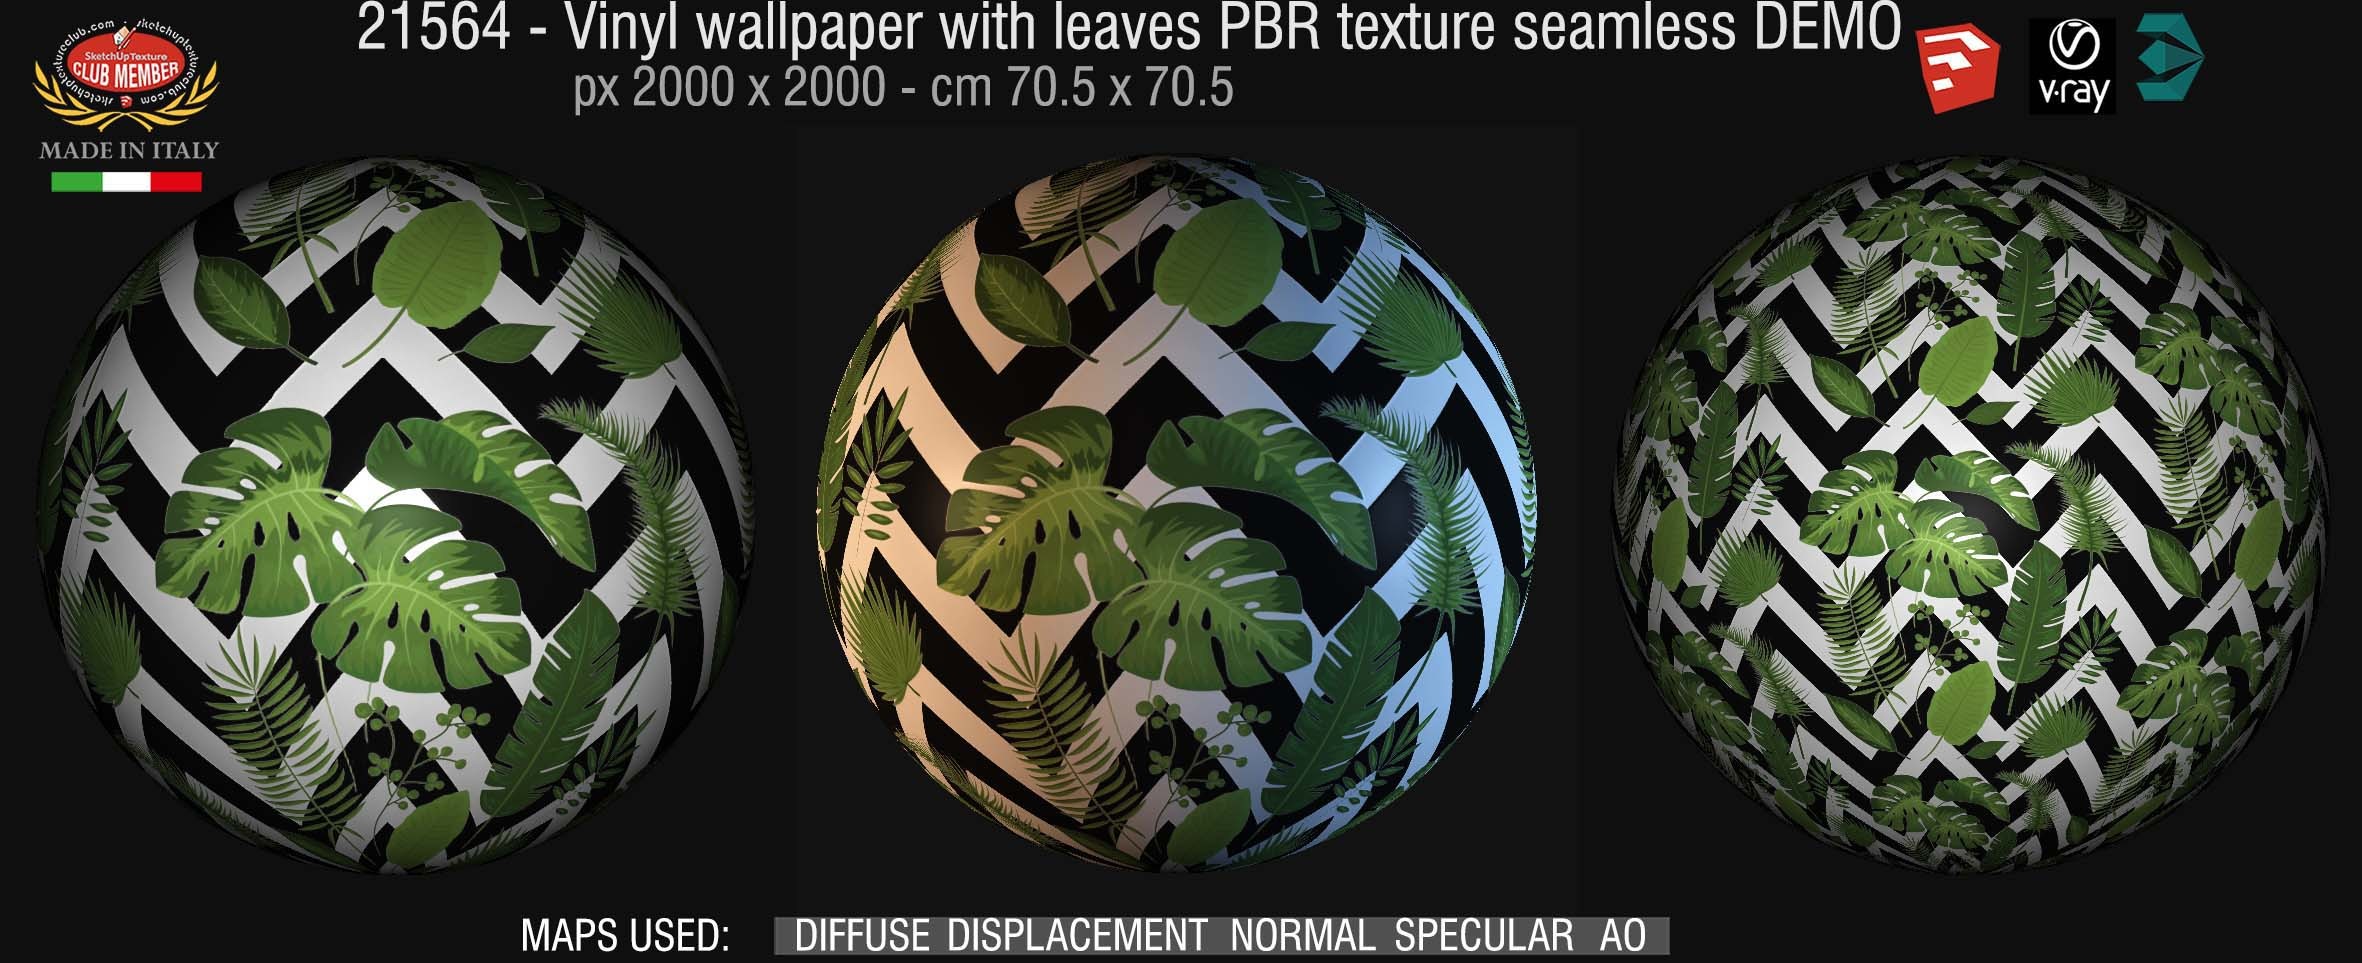 21564 Vinyl wallpaper with leaves PBR texture seamless DEMO